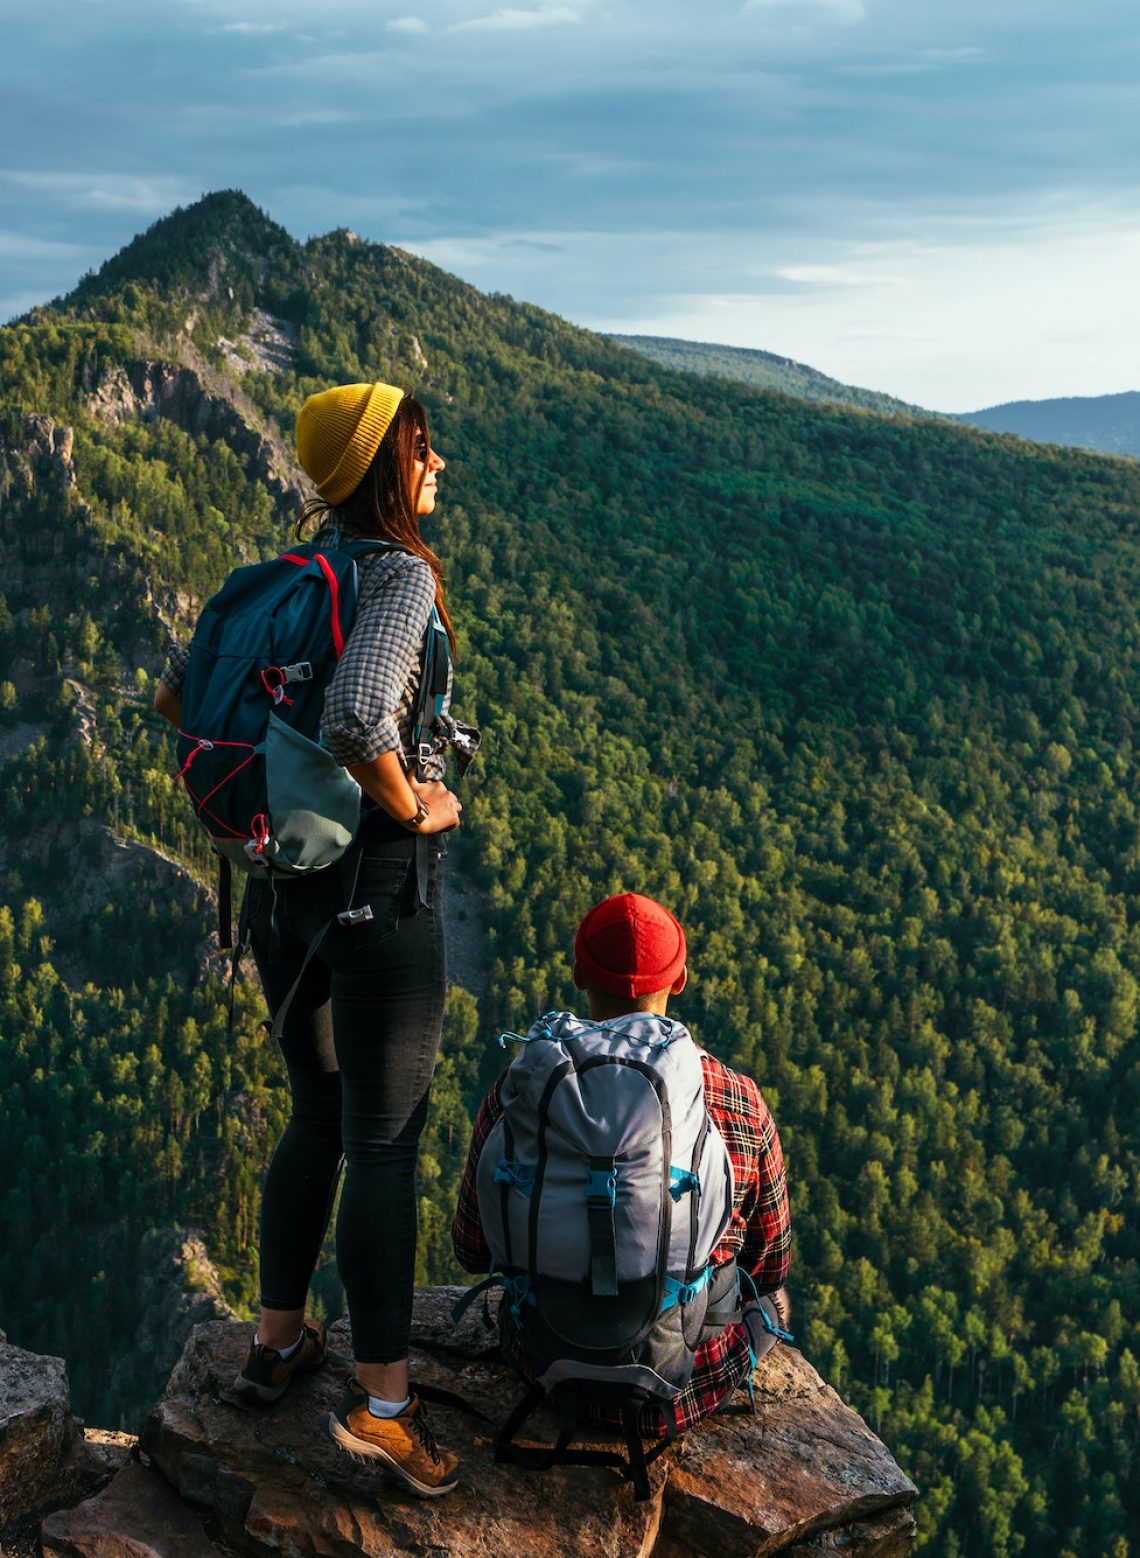 A man and a woman with backpacks on the mountain admire the panoramic view. Hiking